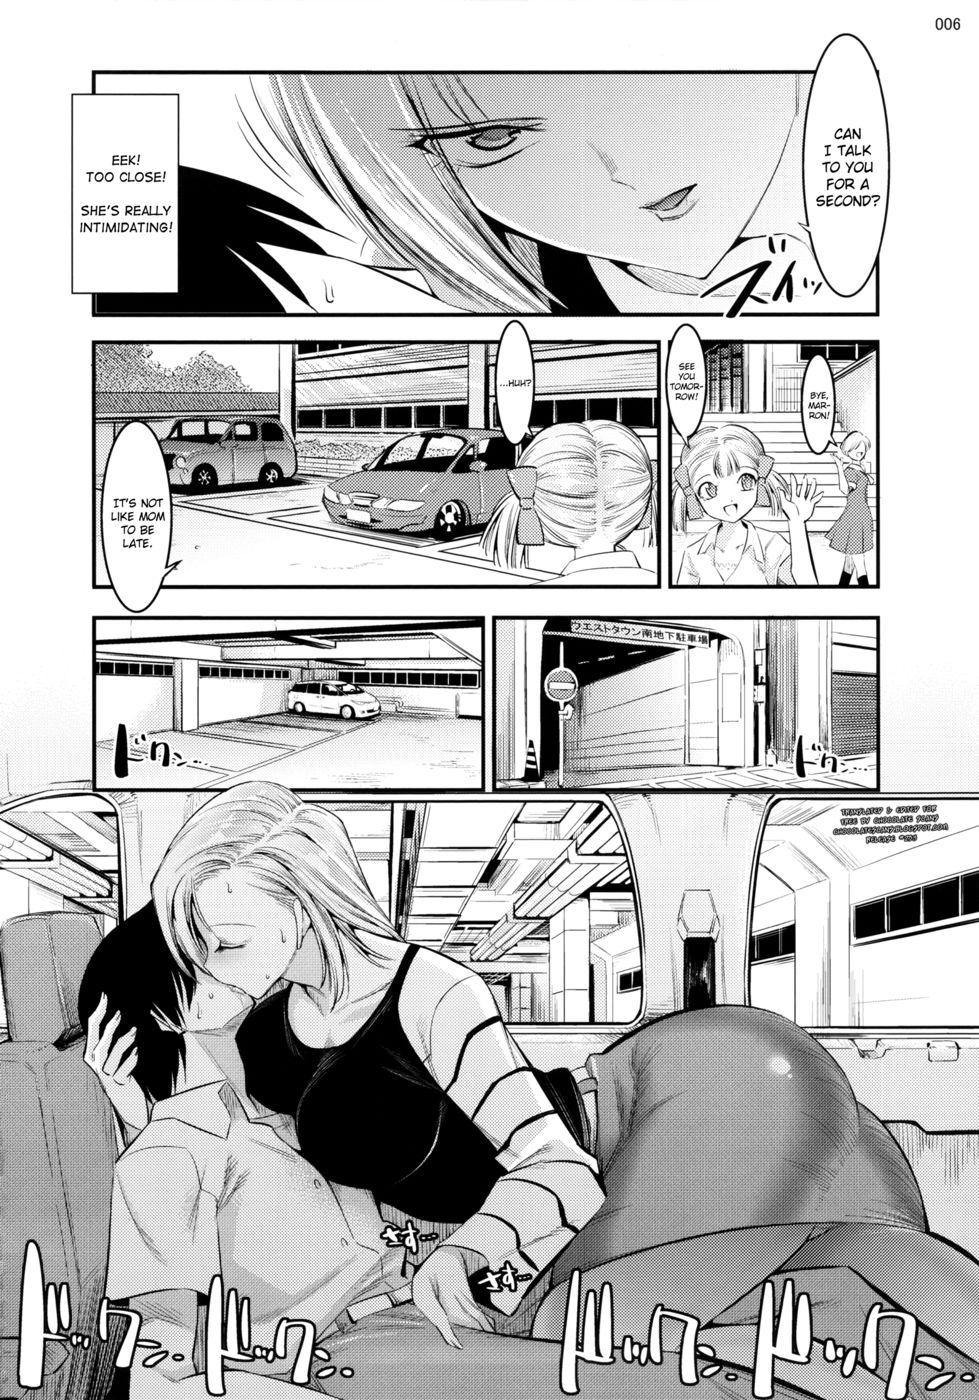 Hentai Manga Comic-Tender First Time With Android 18-Read-5